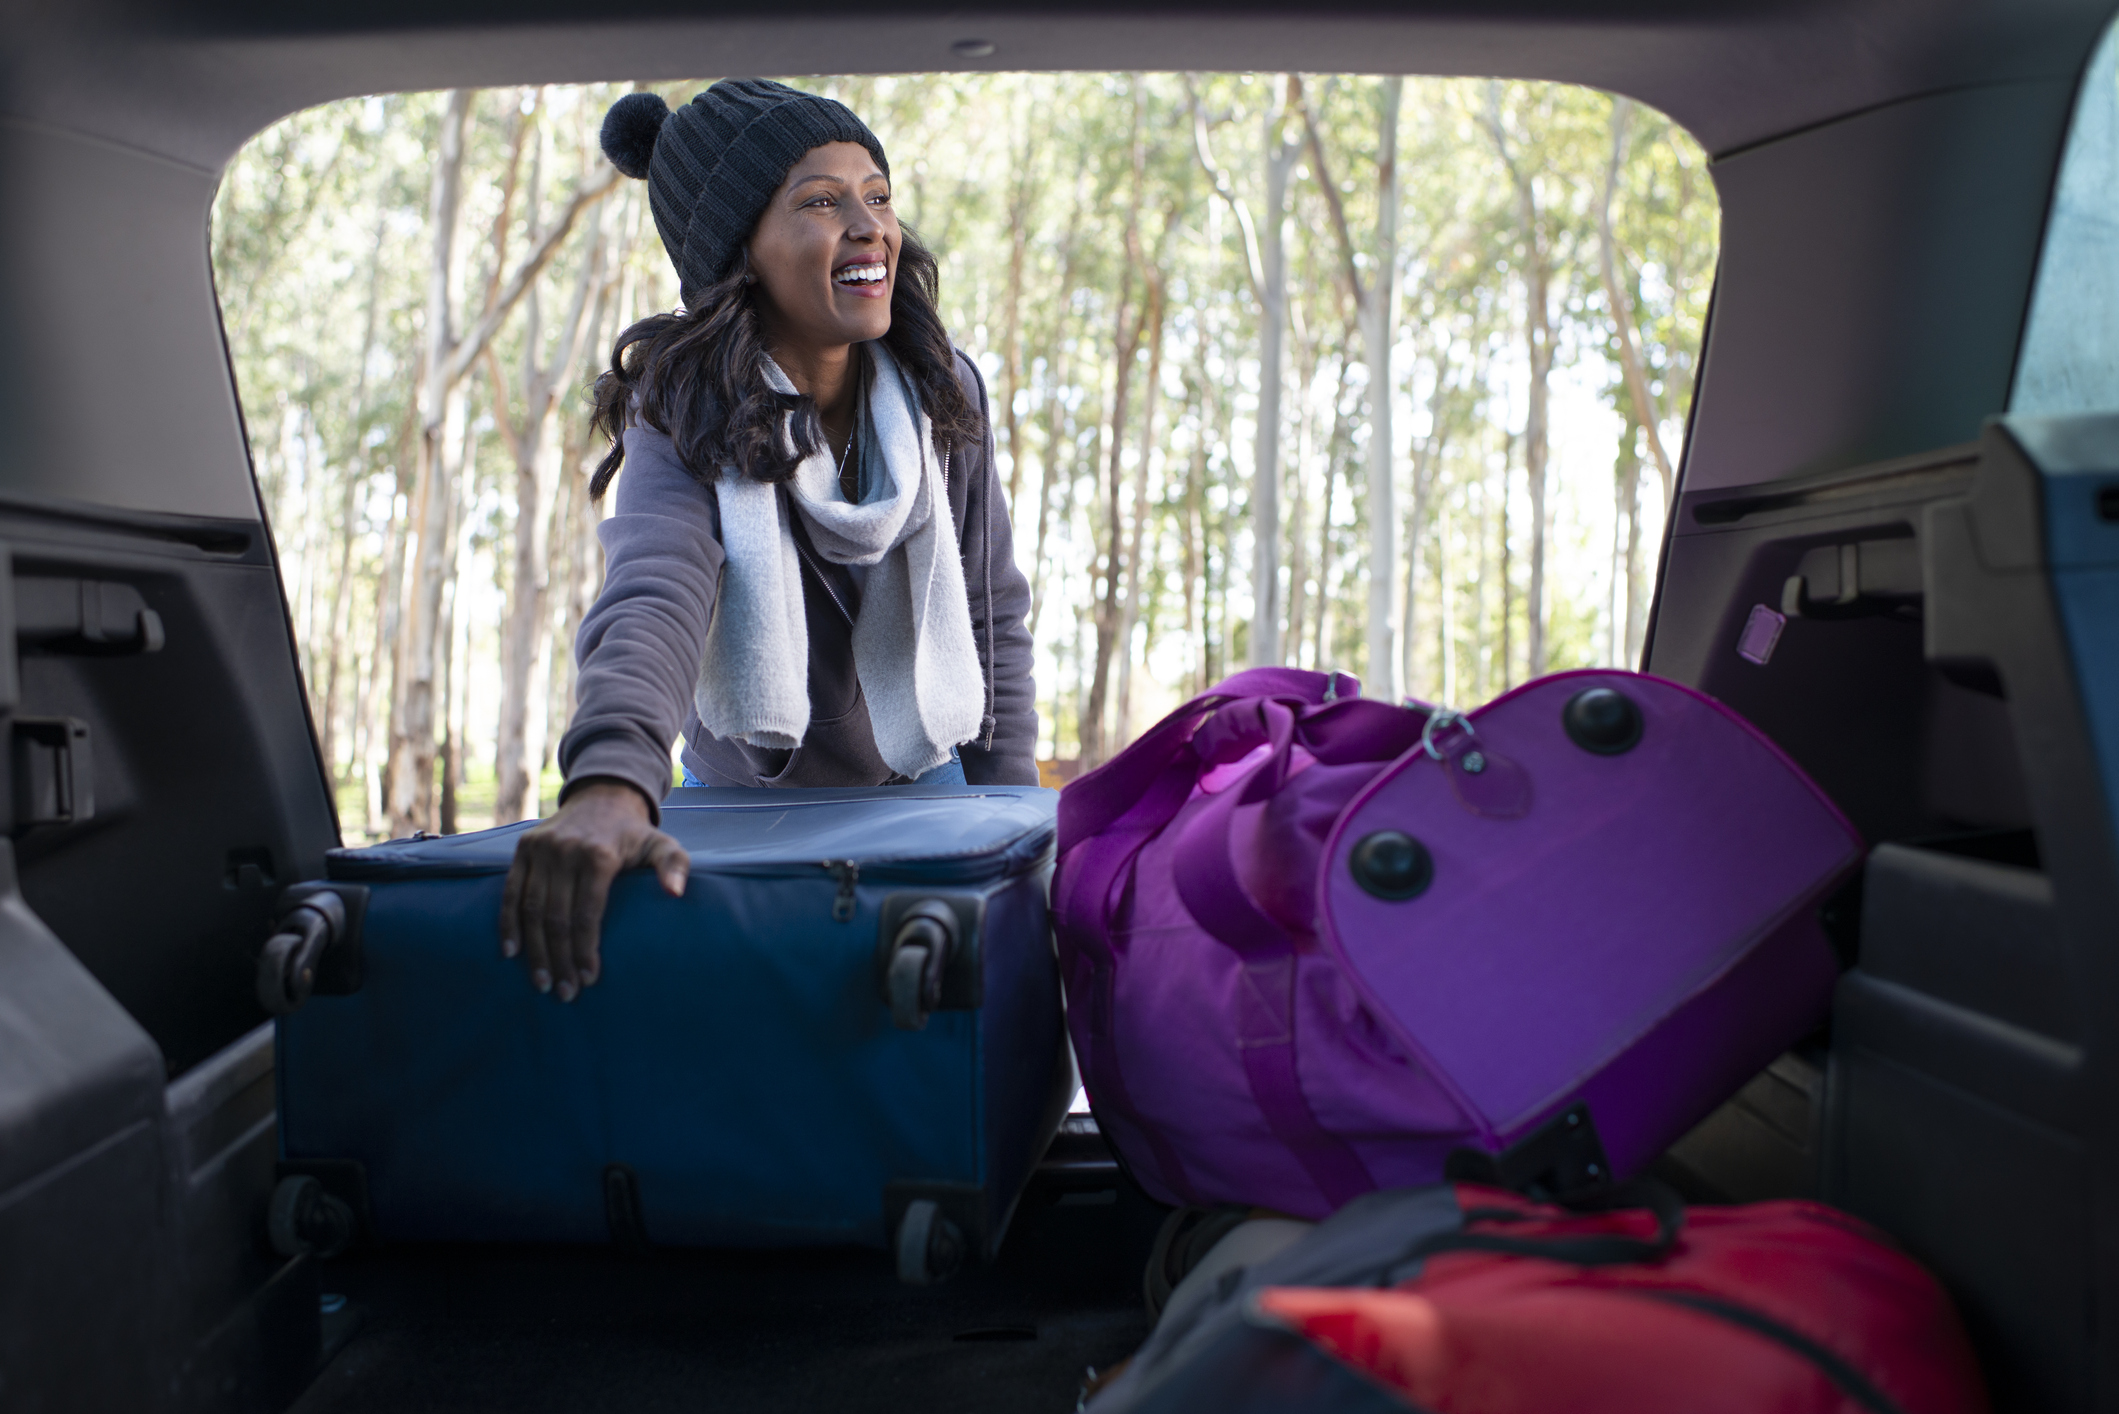 8 Safety Items To Have In Your Car For A Road Trip